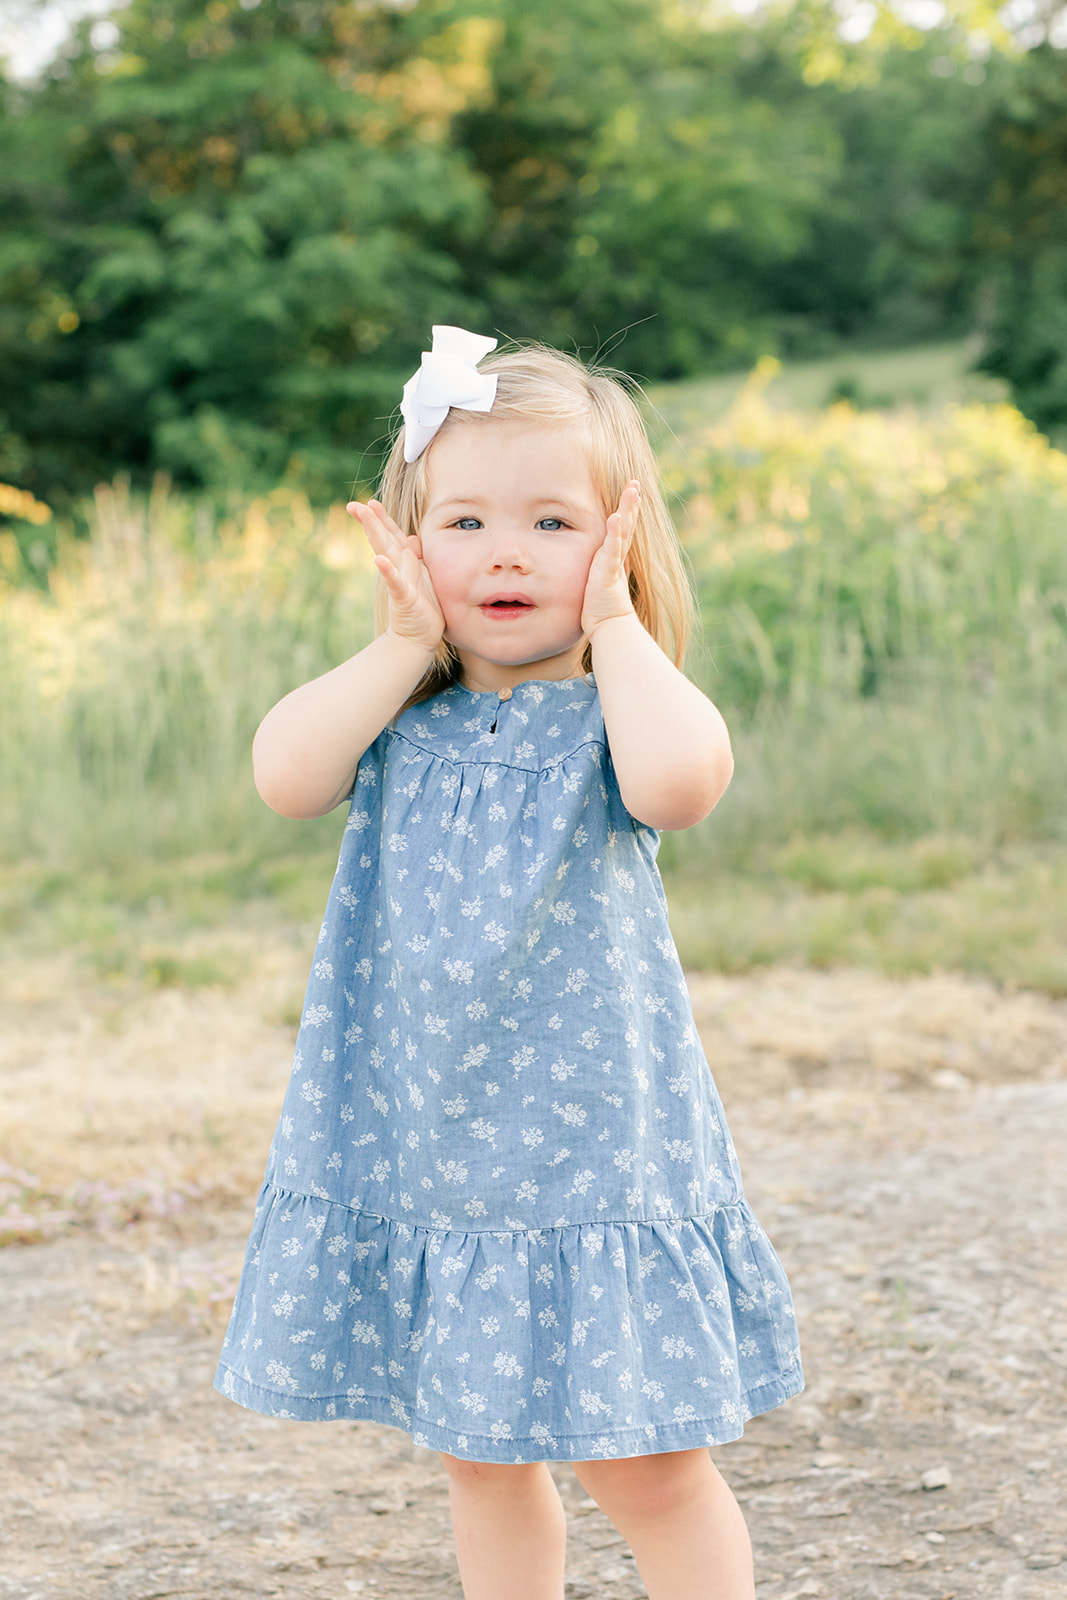 outdoor family photos for 2 year baby milestone session in nashville tennessee. photo of little girl